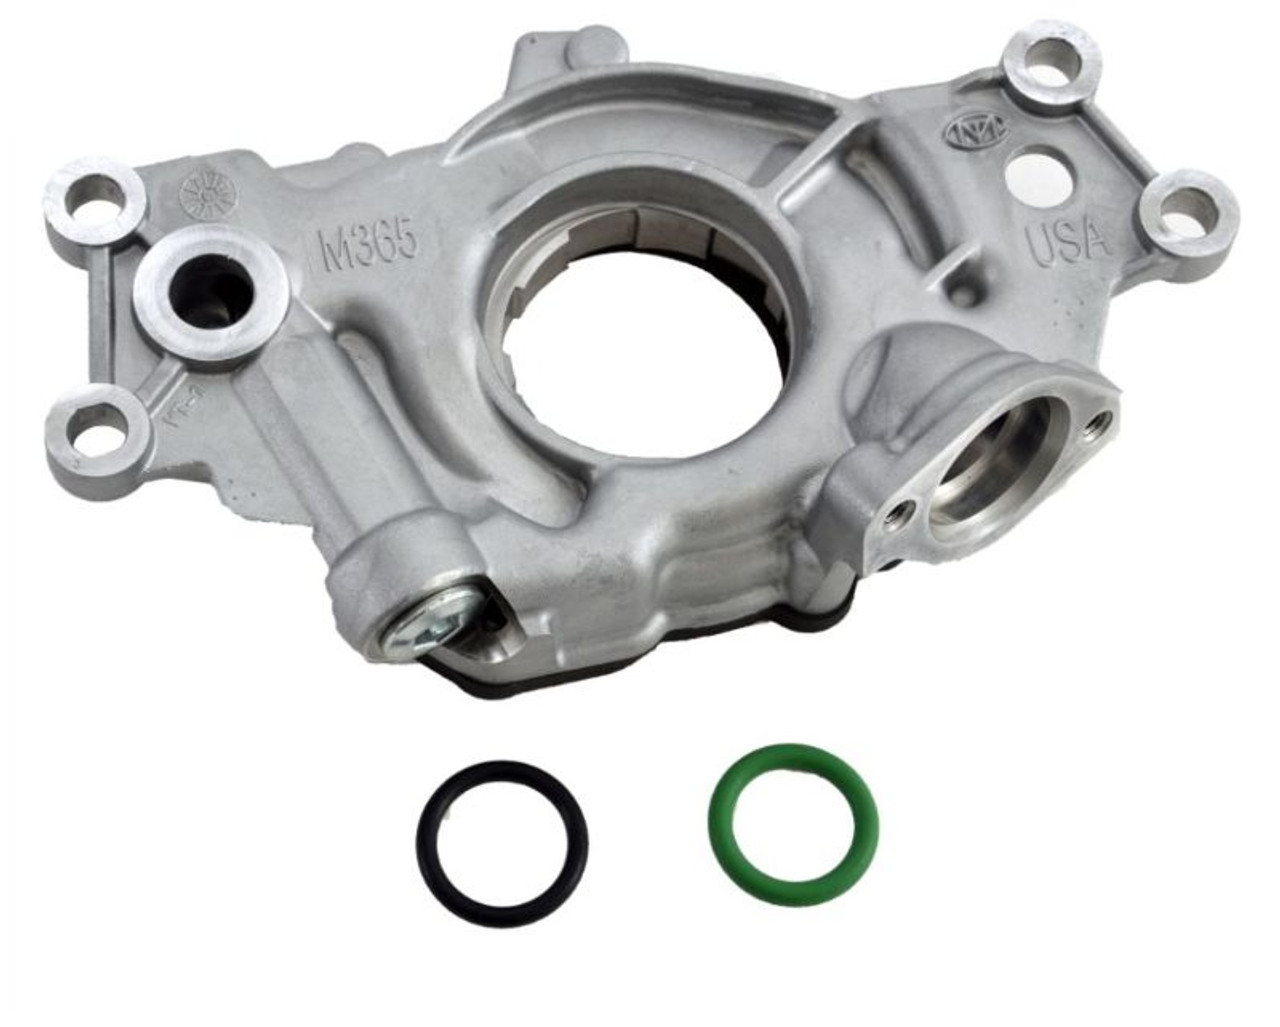 2015 Cadillac CTS 6.2L Engine Oil Pump EP365 -285